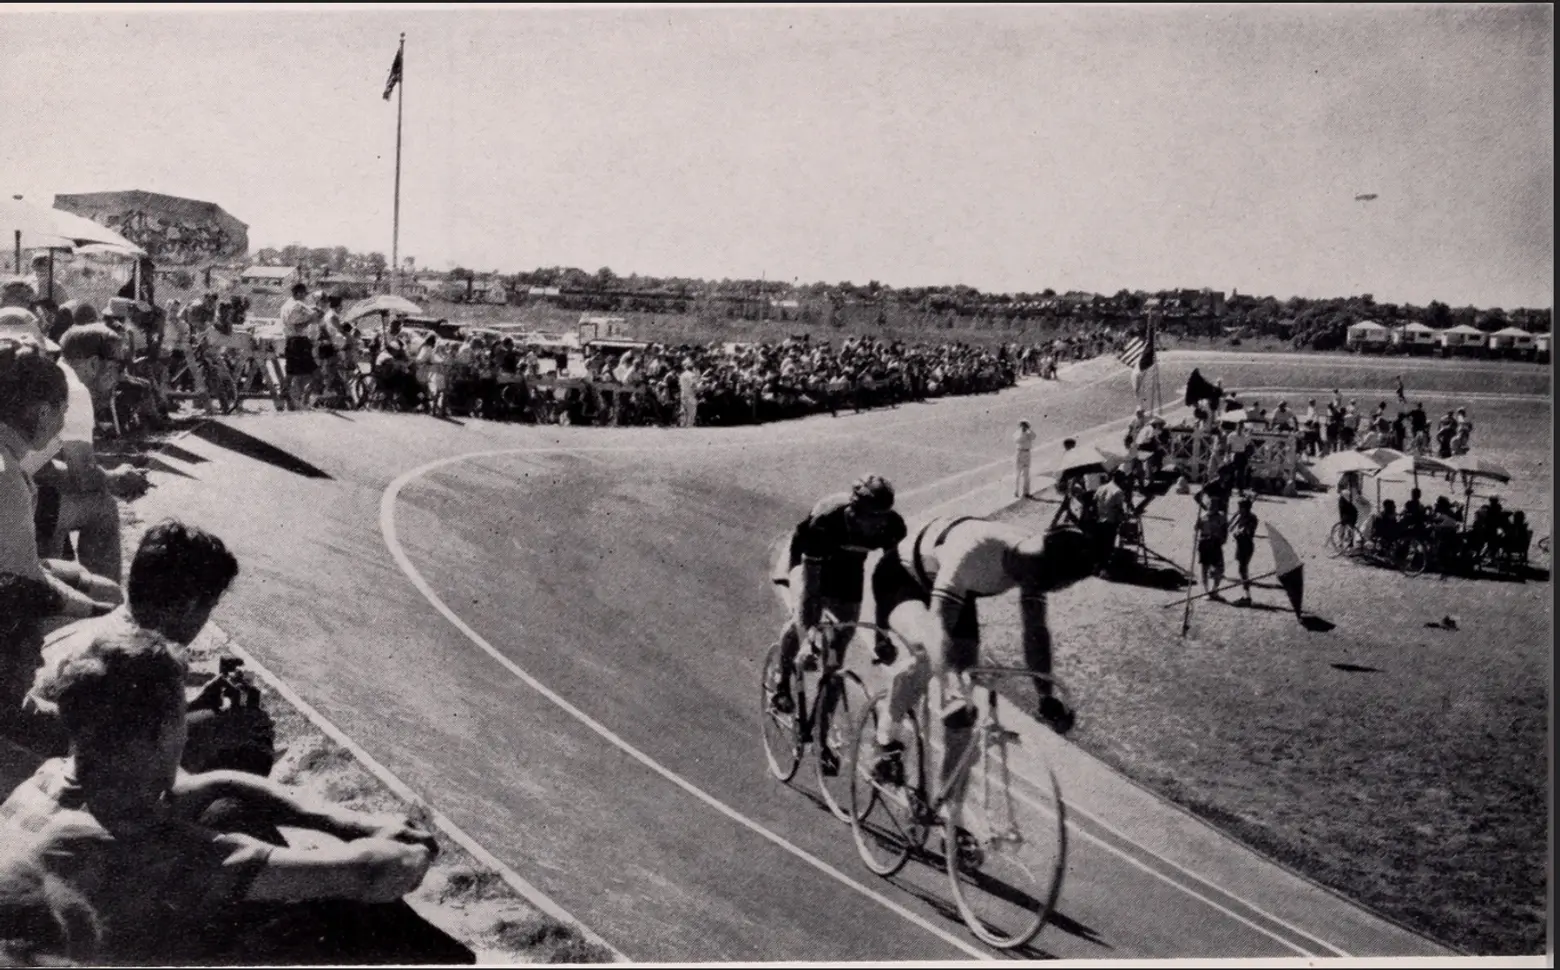 Did you know NYC’s only surviving cycling track is in Flushing?